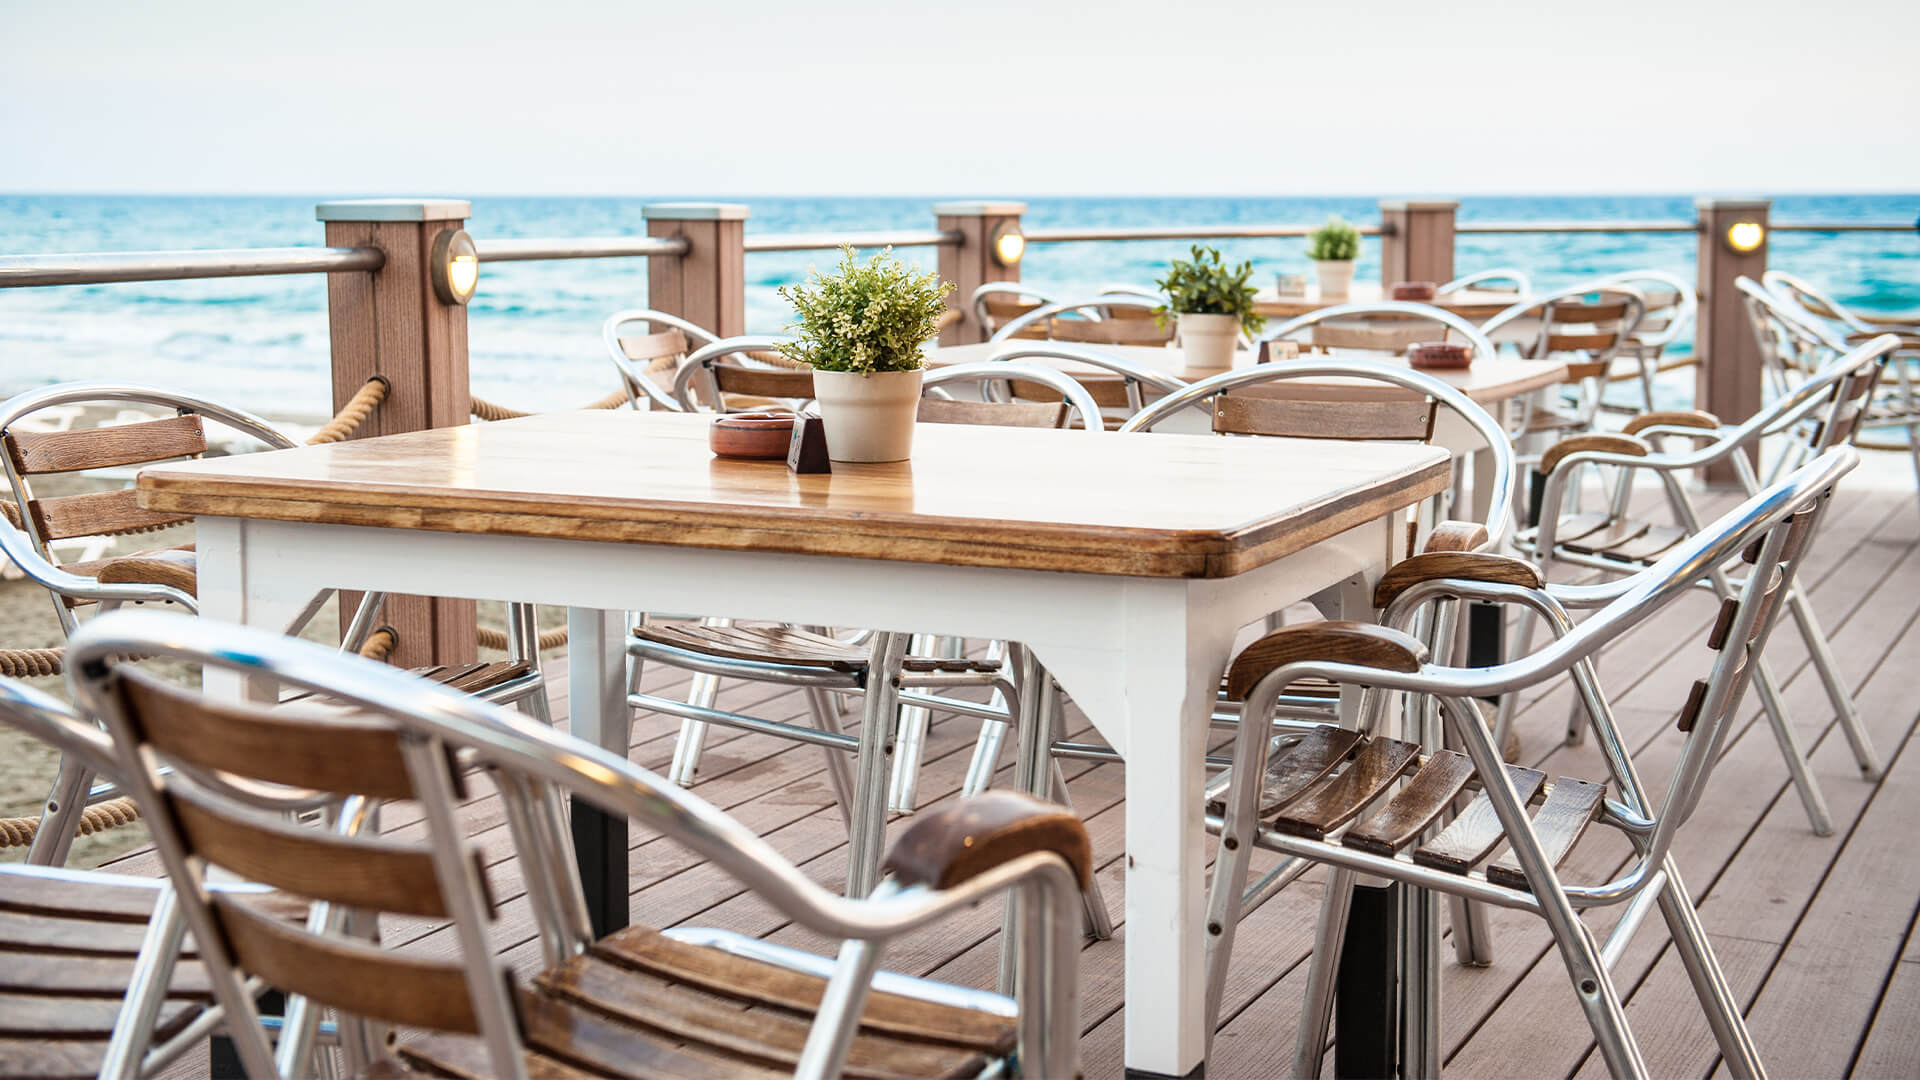 Outdoor tables and chairs near the seaside